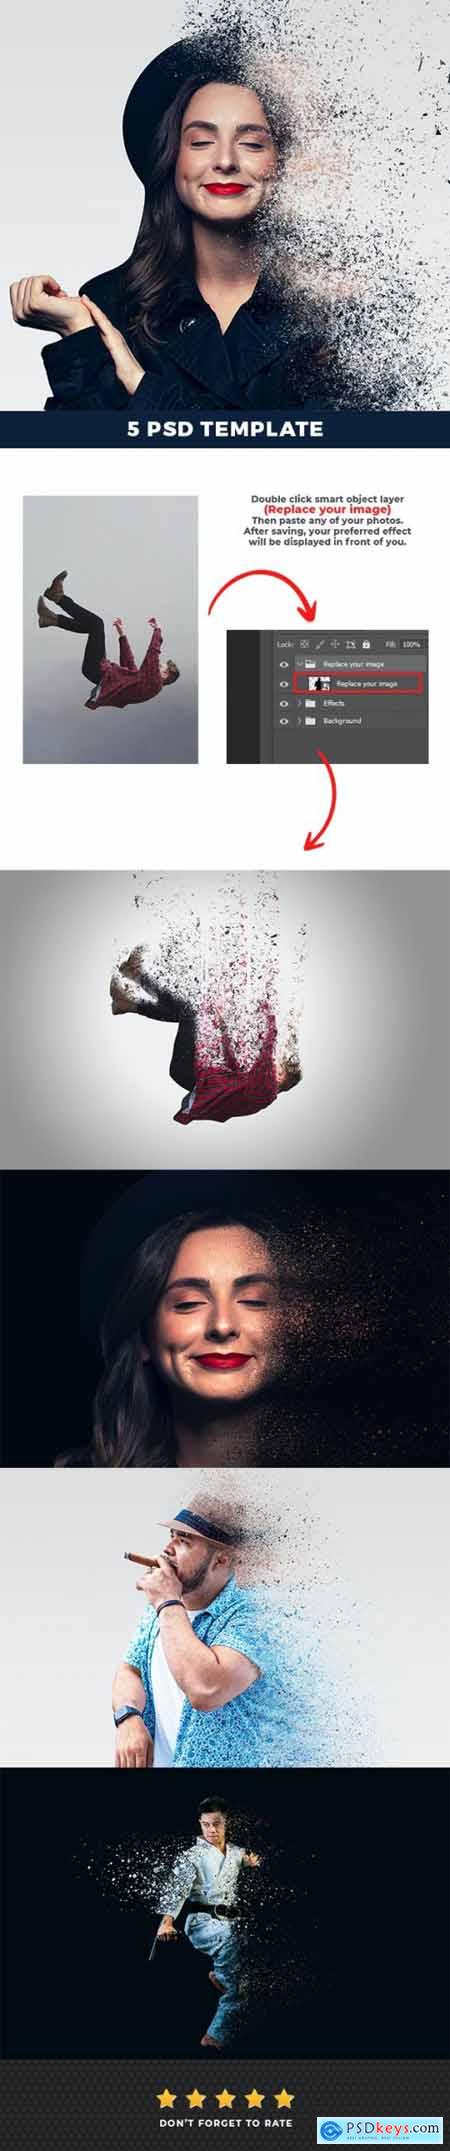 Dispersion Photo Effect Template 36915739